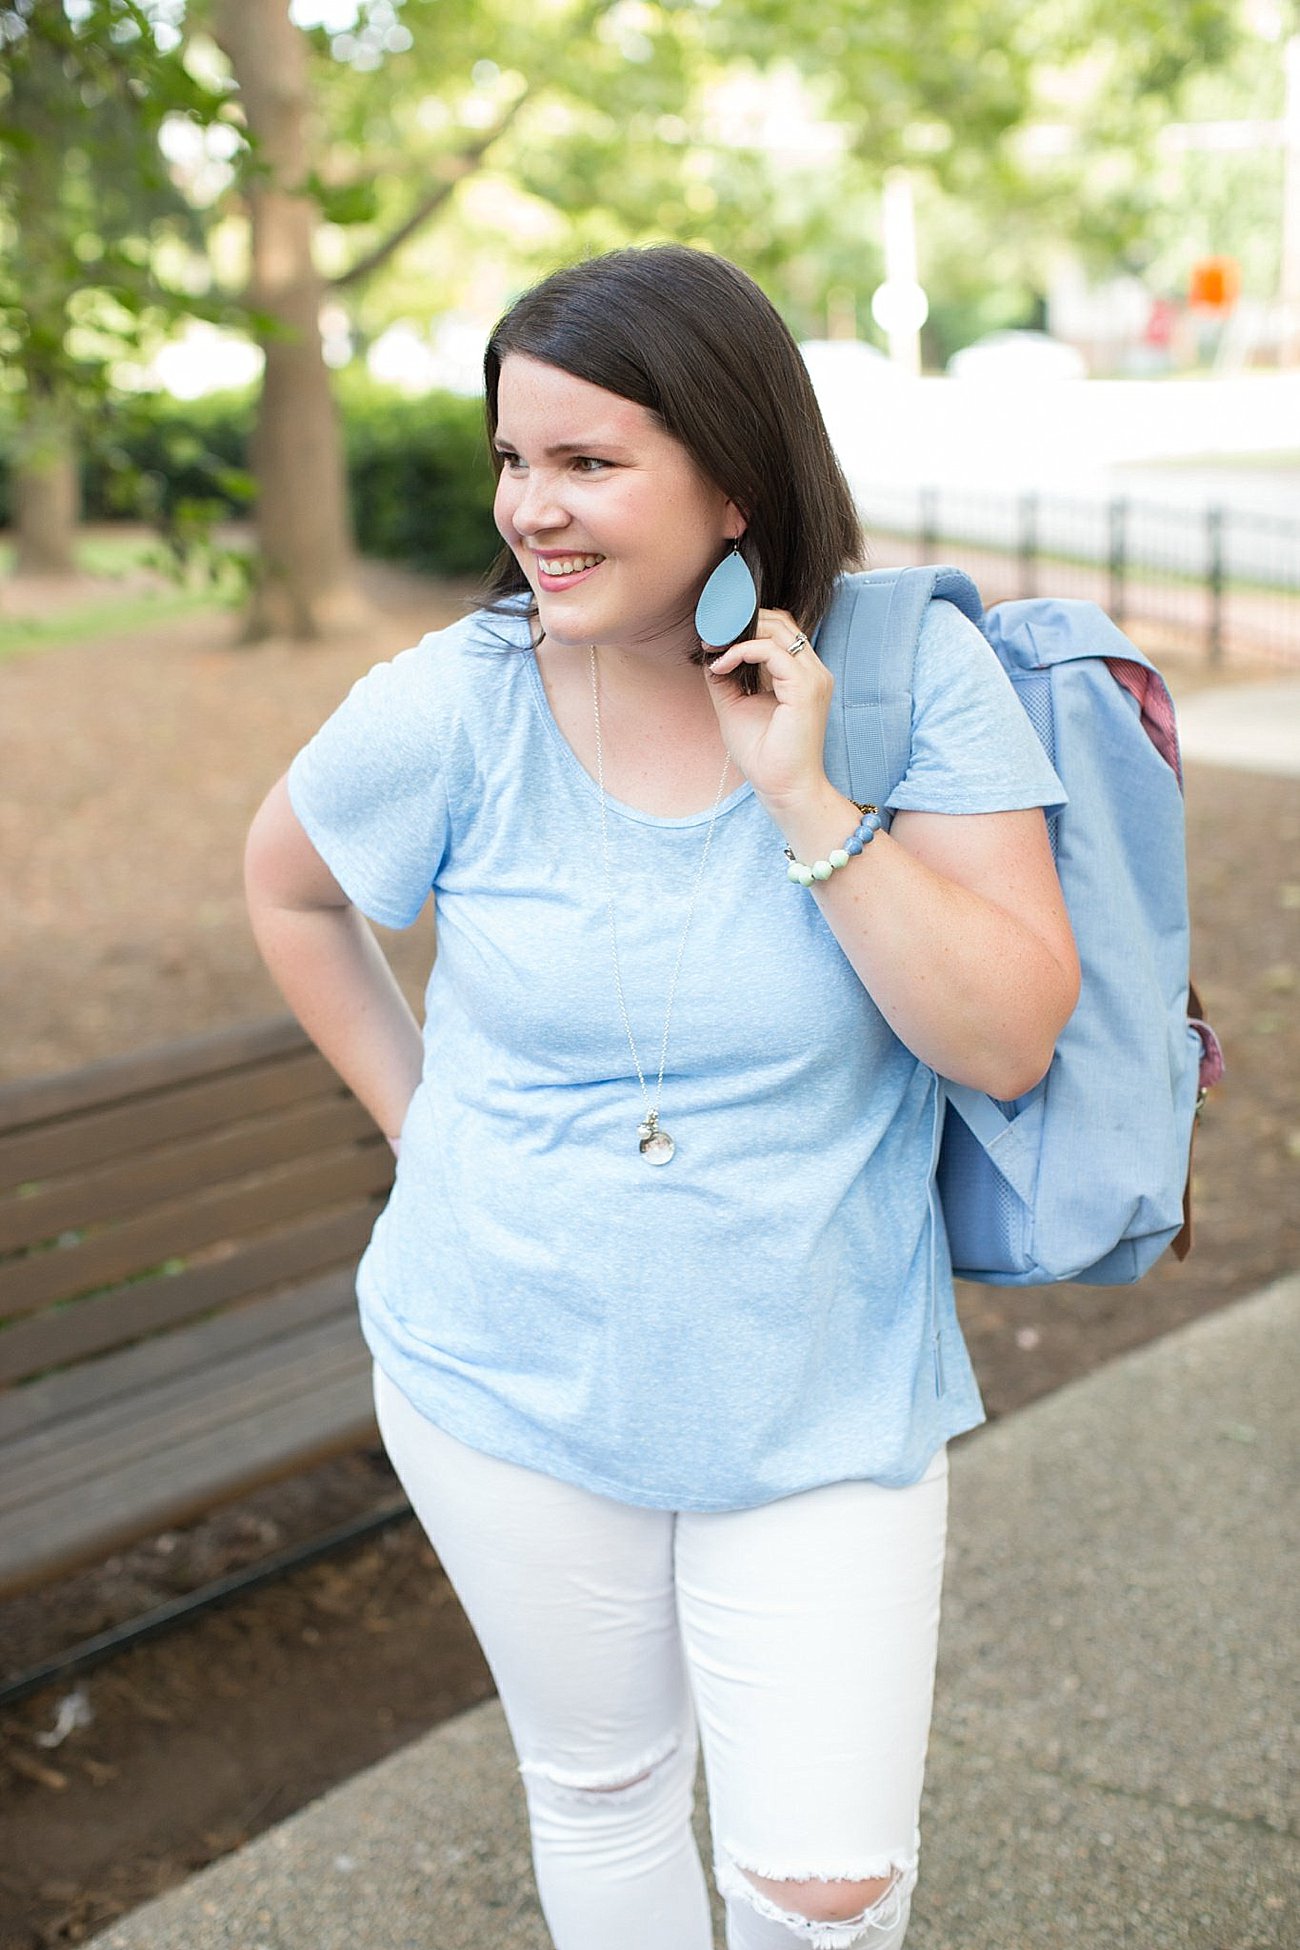 UNC Chapel Hill - Game Day Inspired Outfit - LulaRoe Classic Tee, Herschel Supply Co. backpack from ebags.com, The Root Collective Shoes (2)